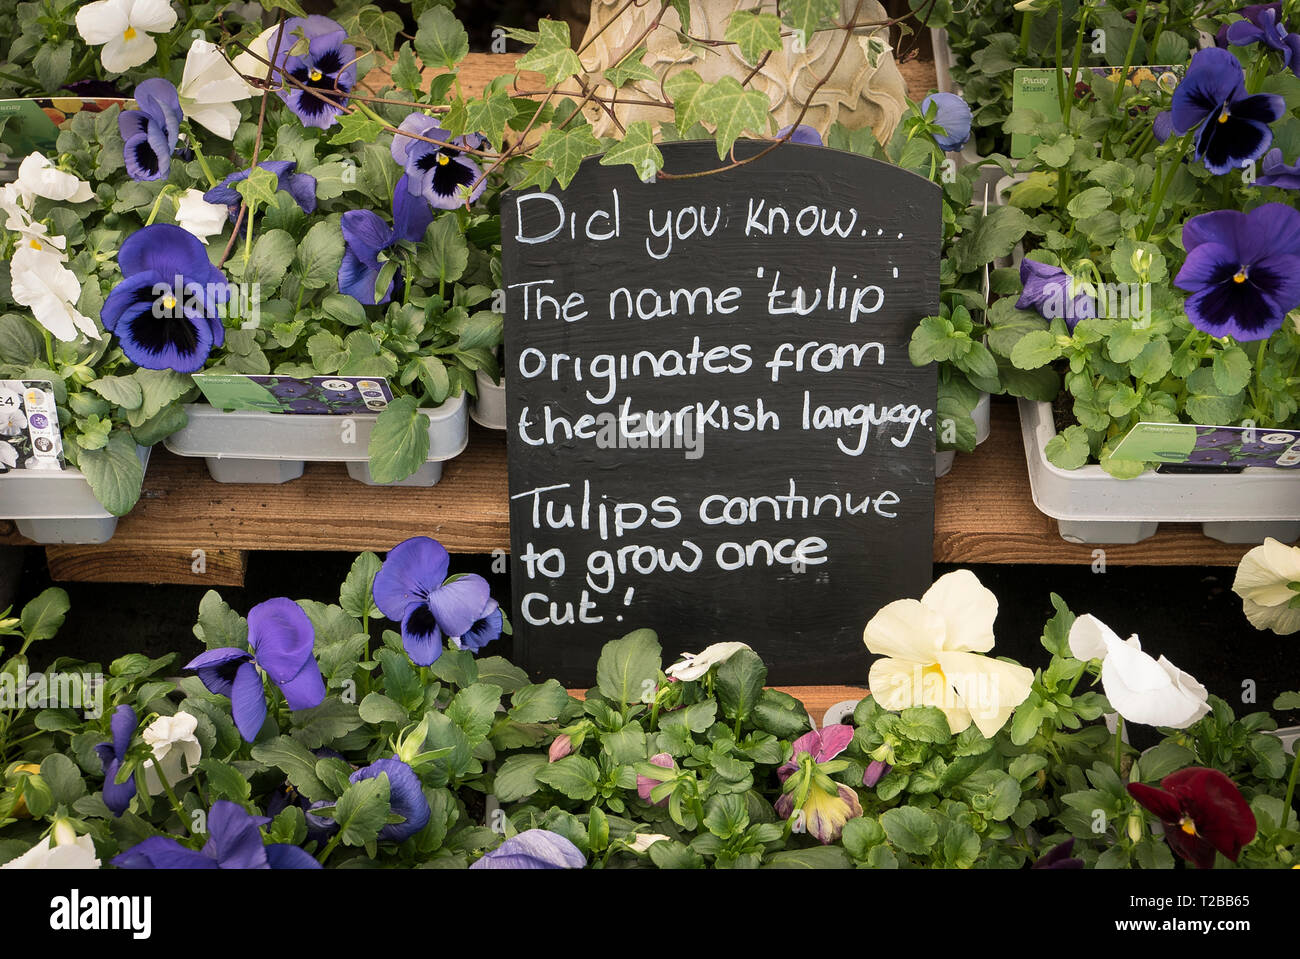 Informative fact made public on a sales table in an English garden centre in Spring Stock Photo